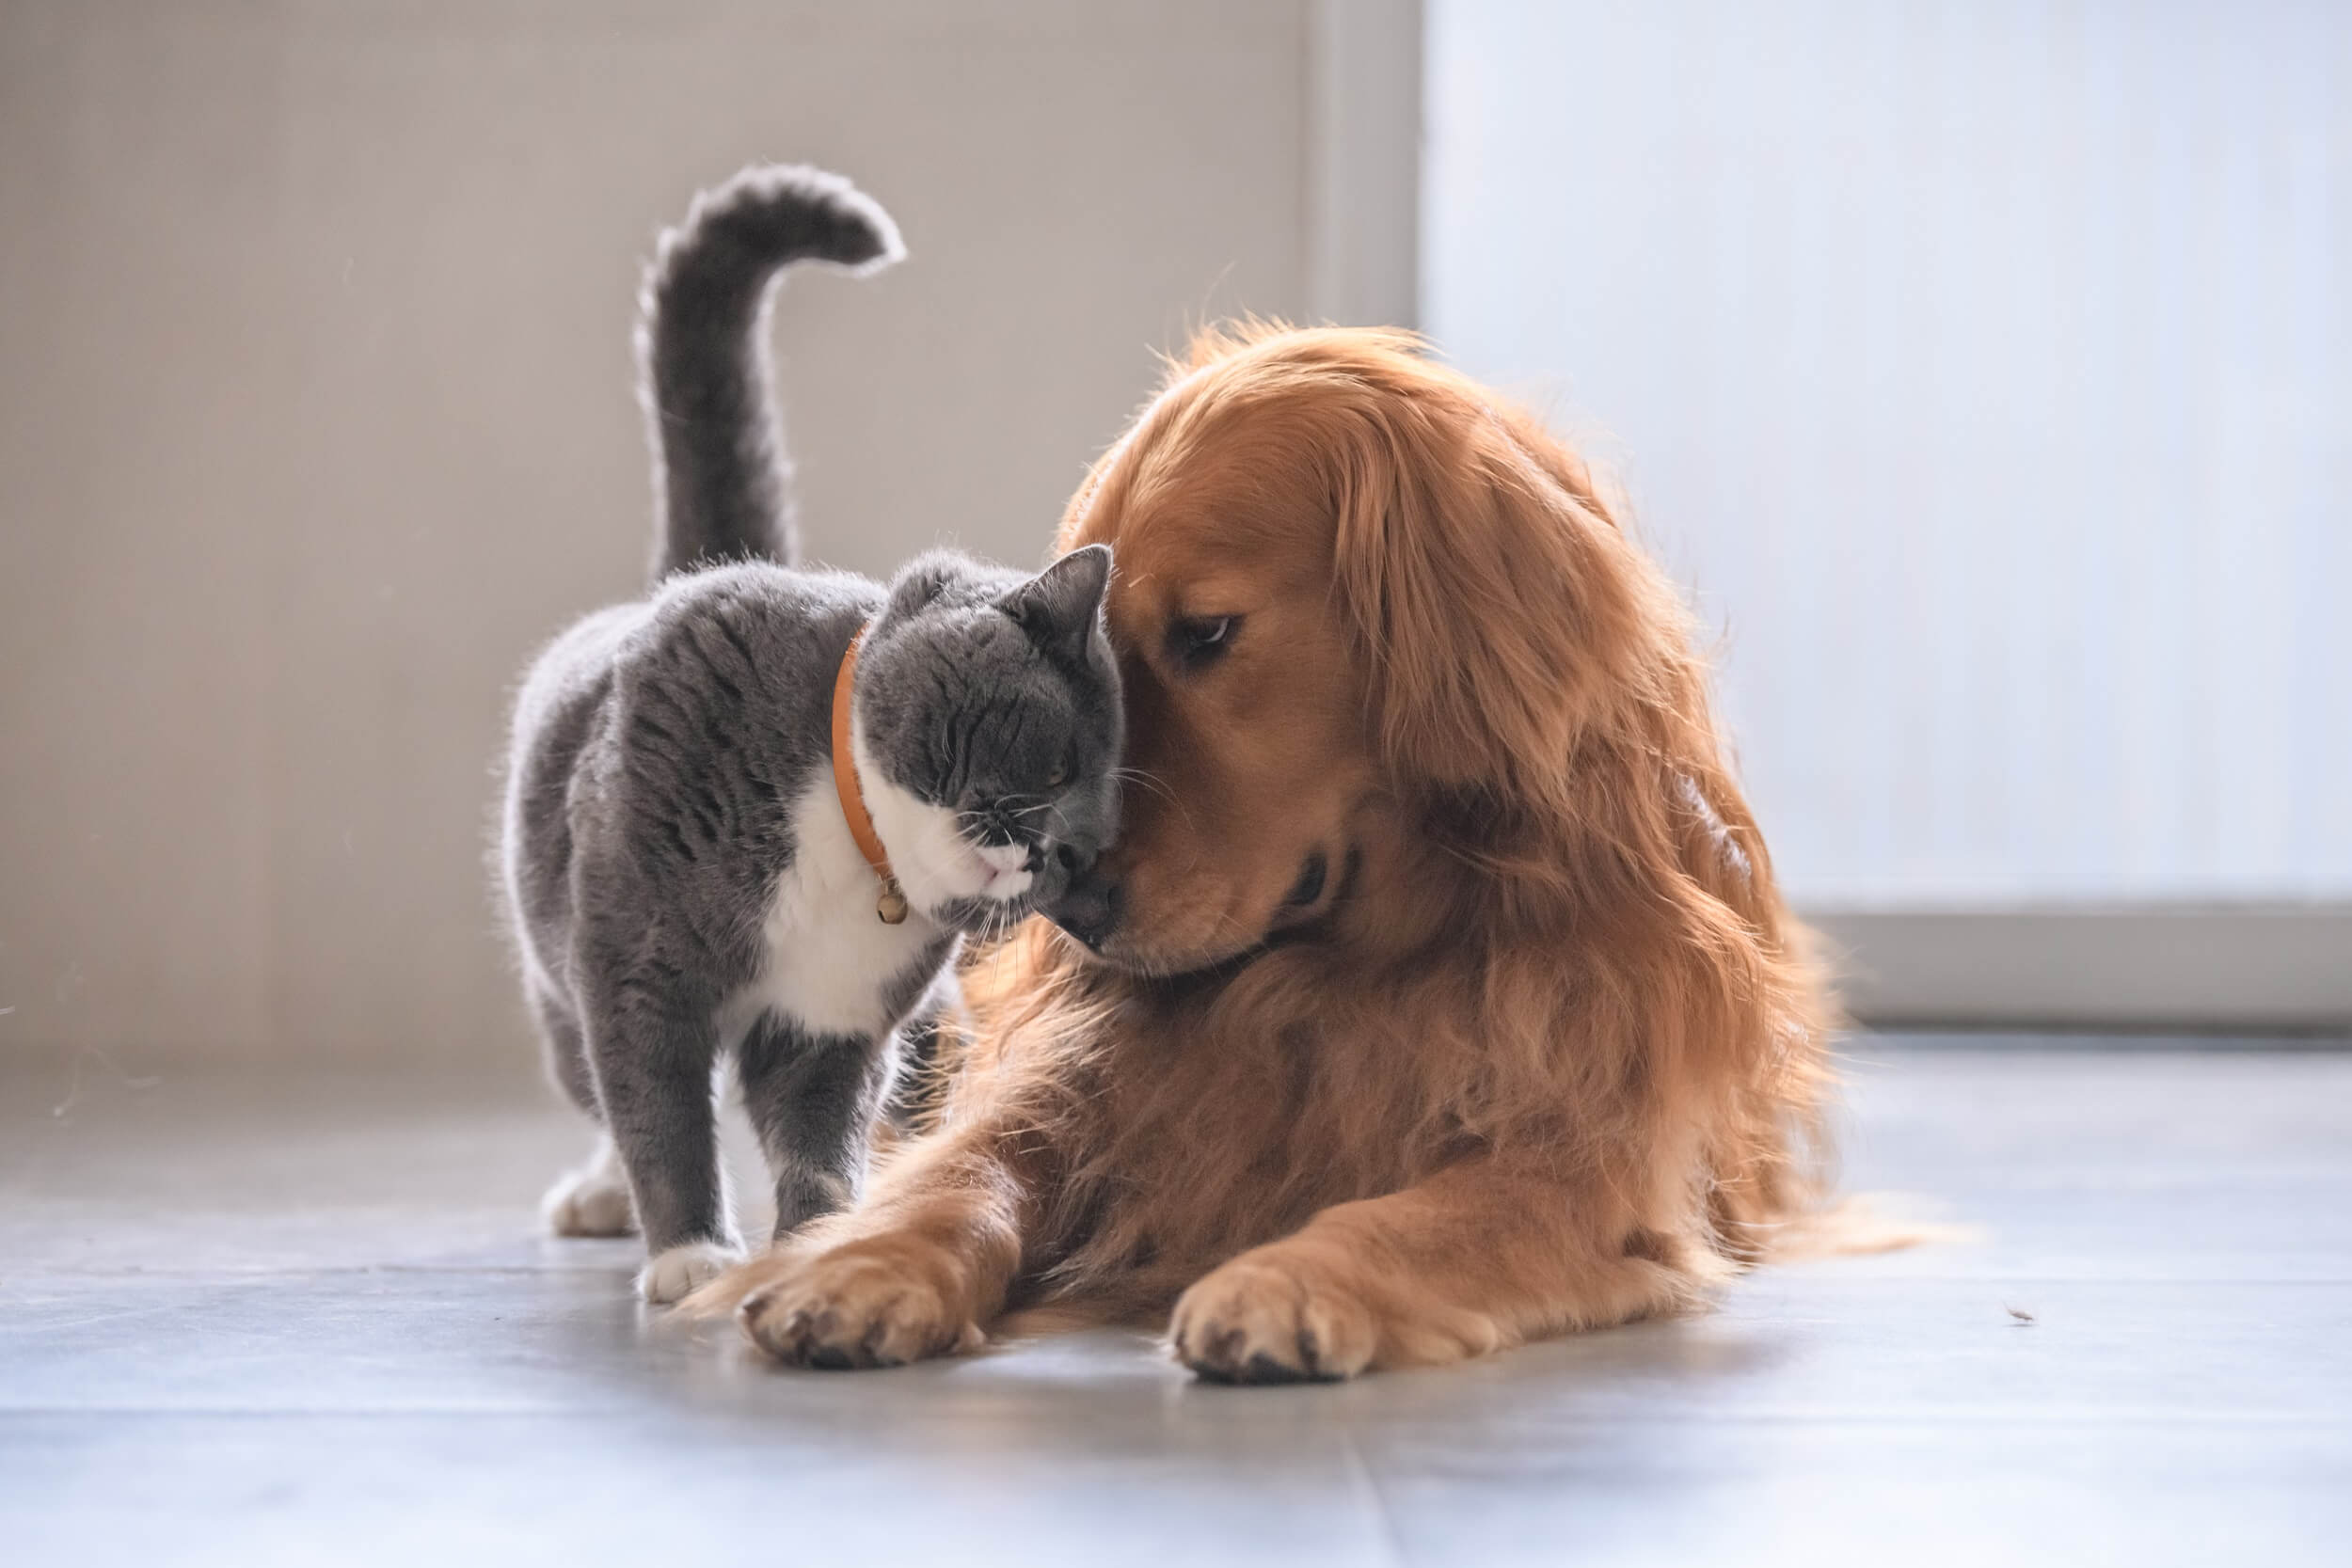 A cat nudging its head into a dog laying down